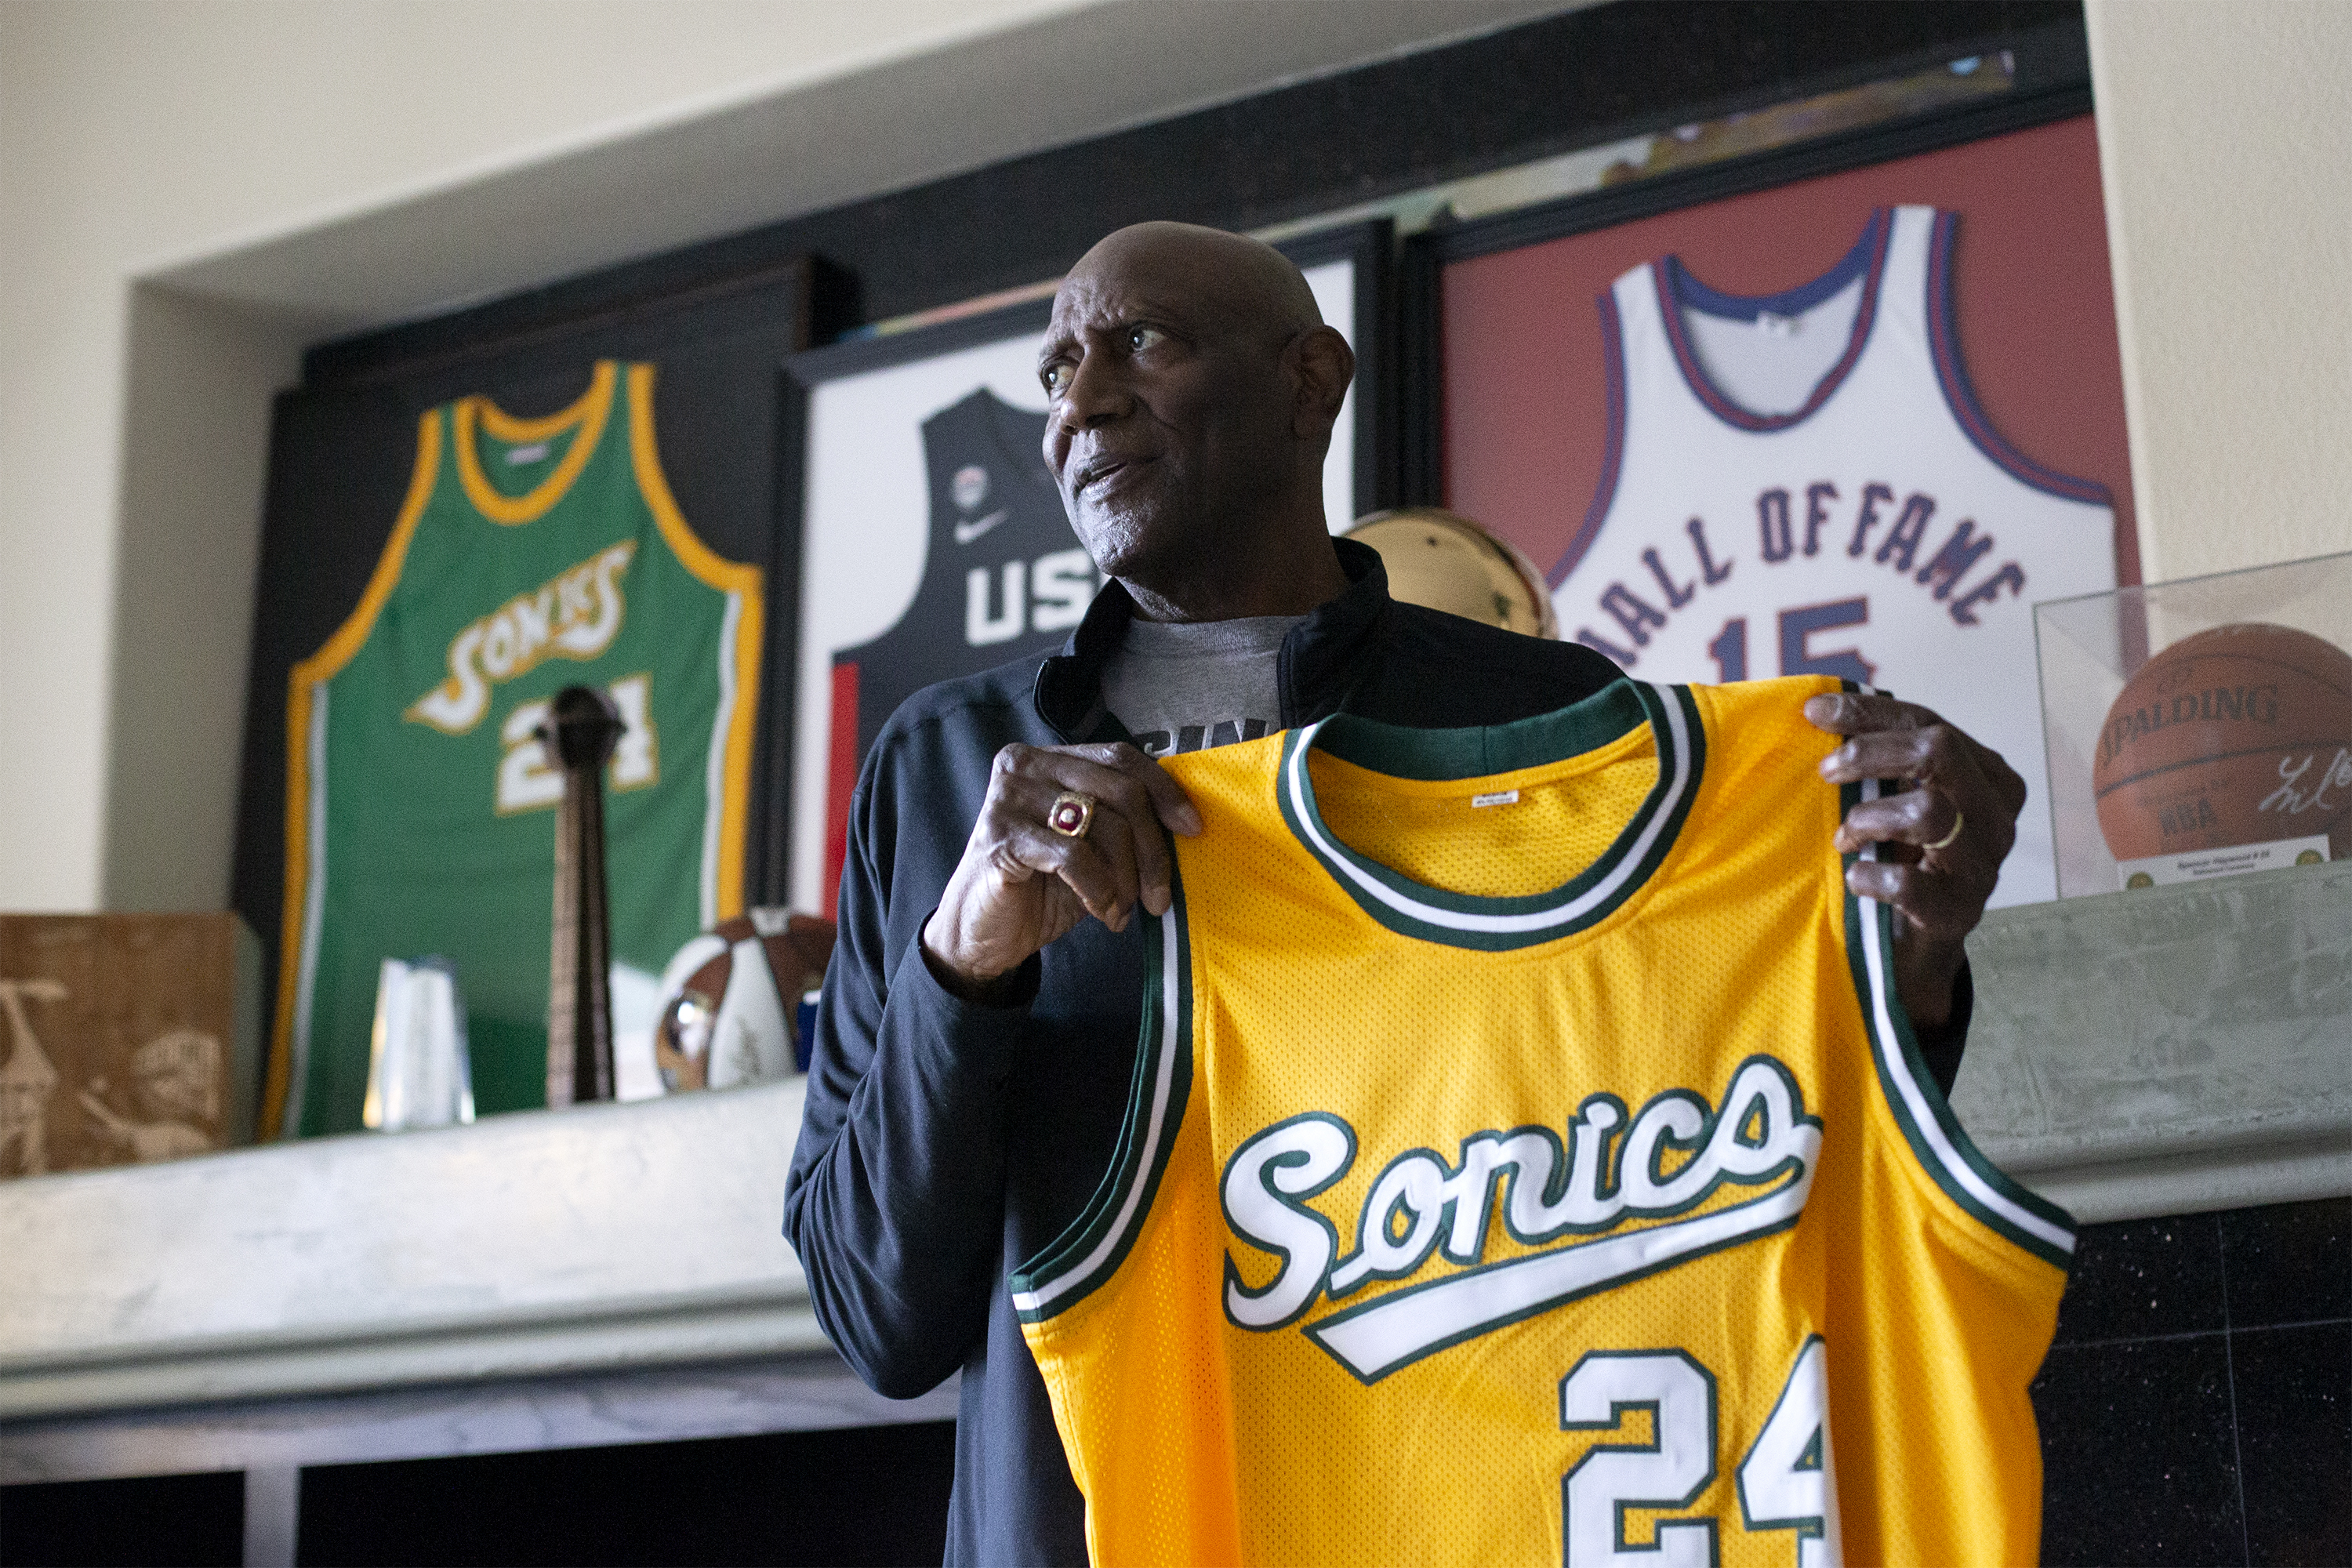 Spencer Haywood: The NBA legend who wanted to kill his coach